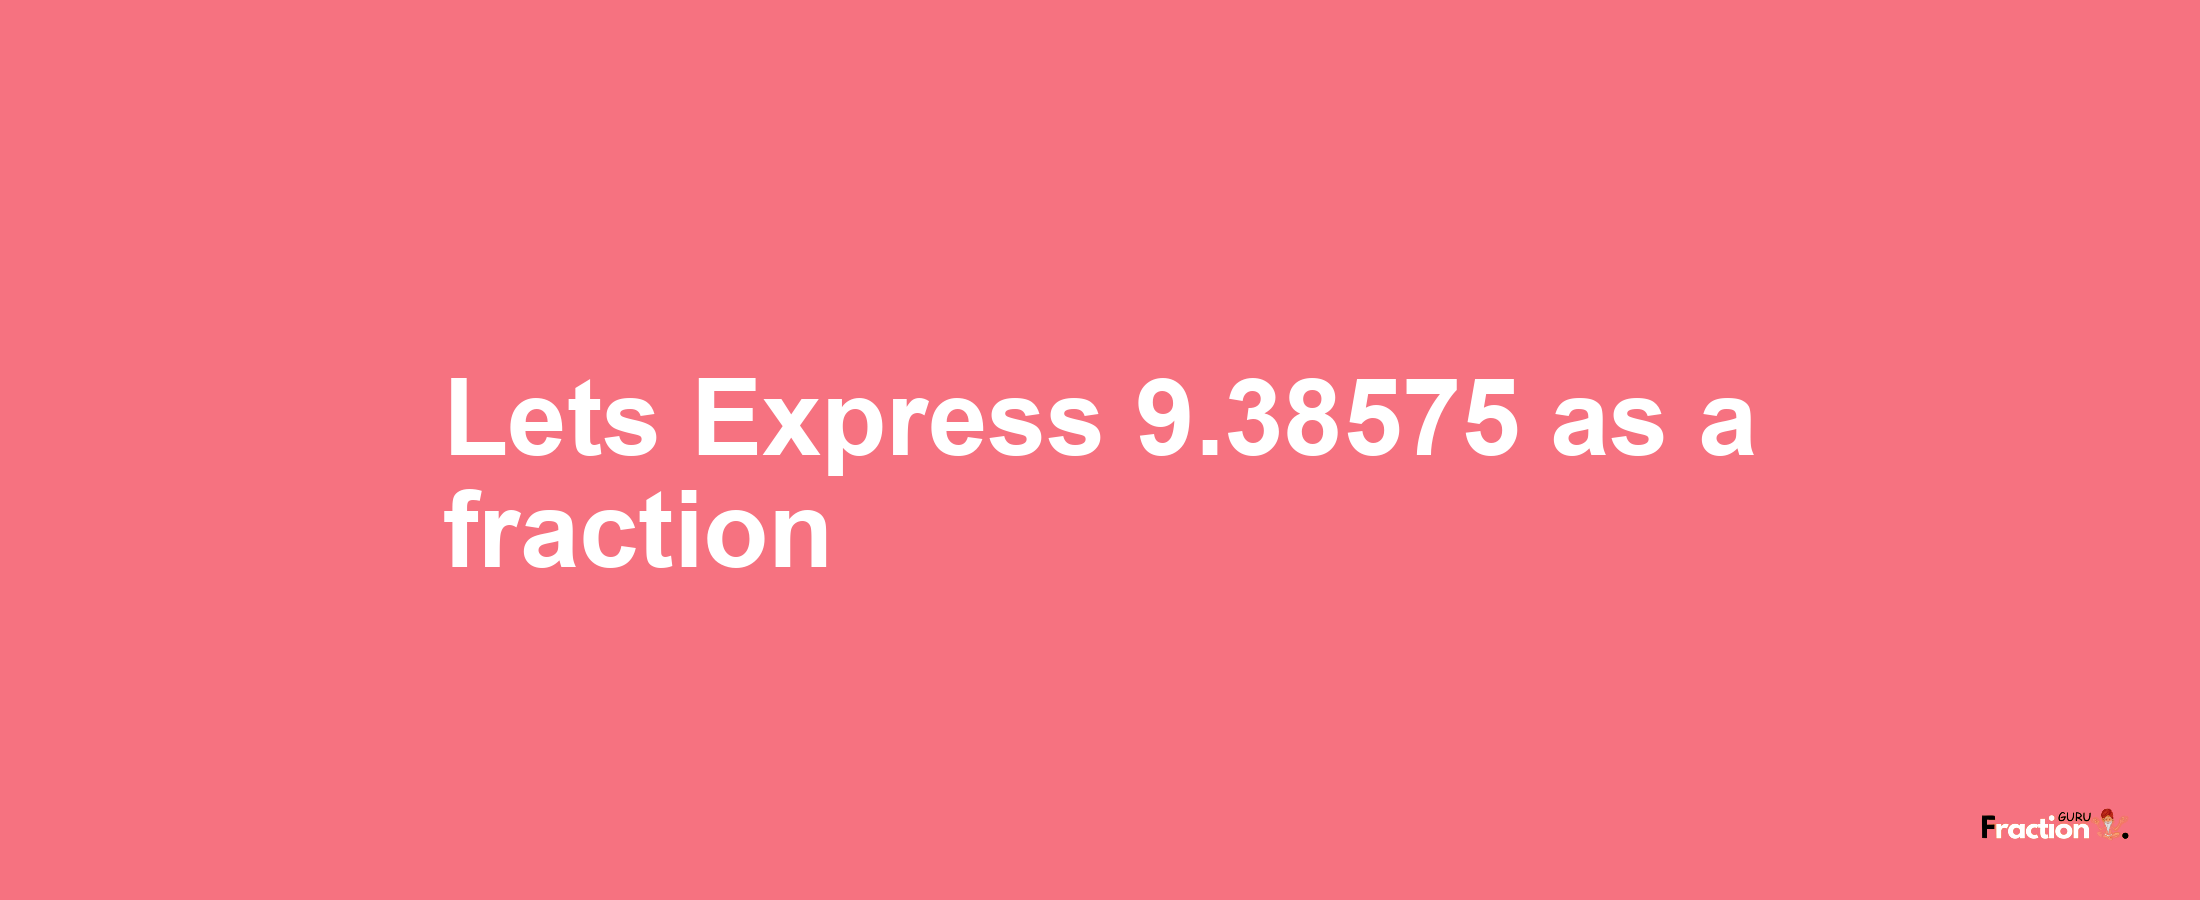 Lets Express 9.38575 as afraction